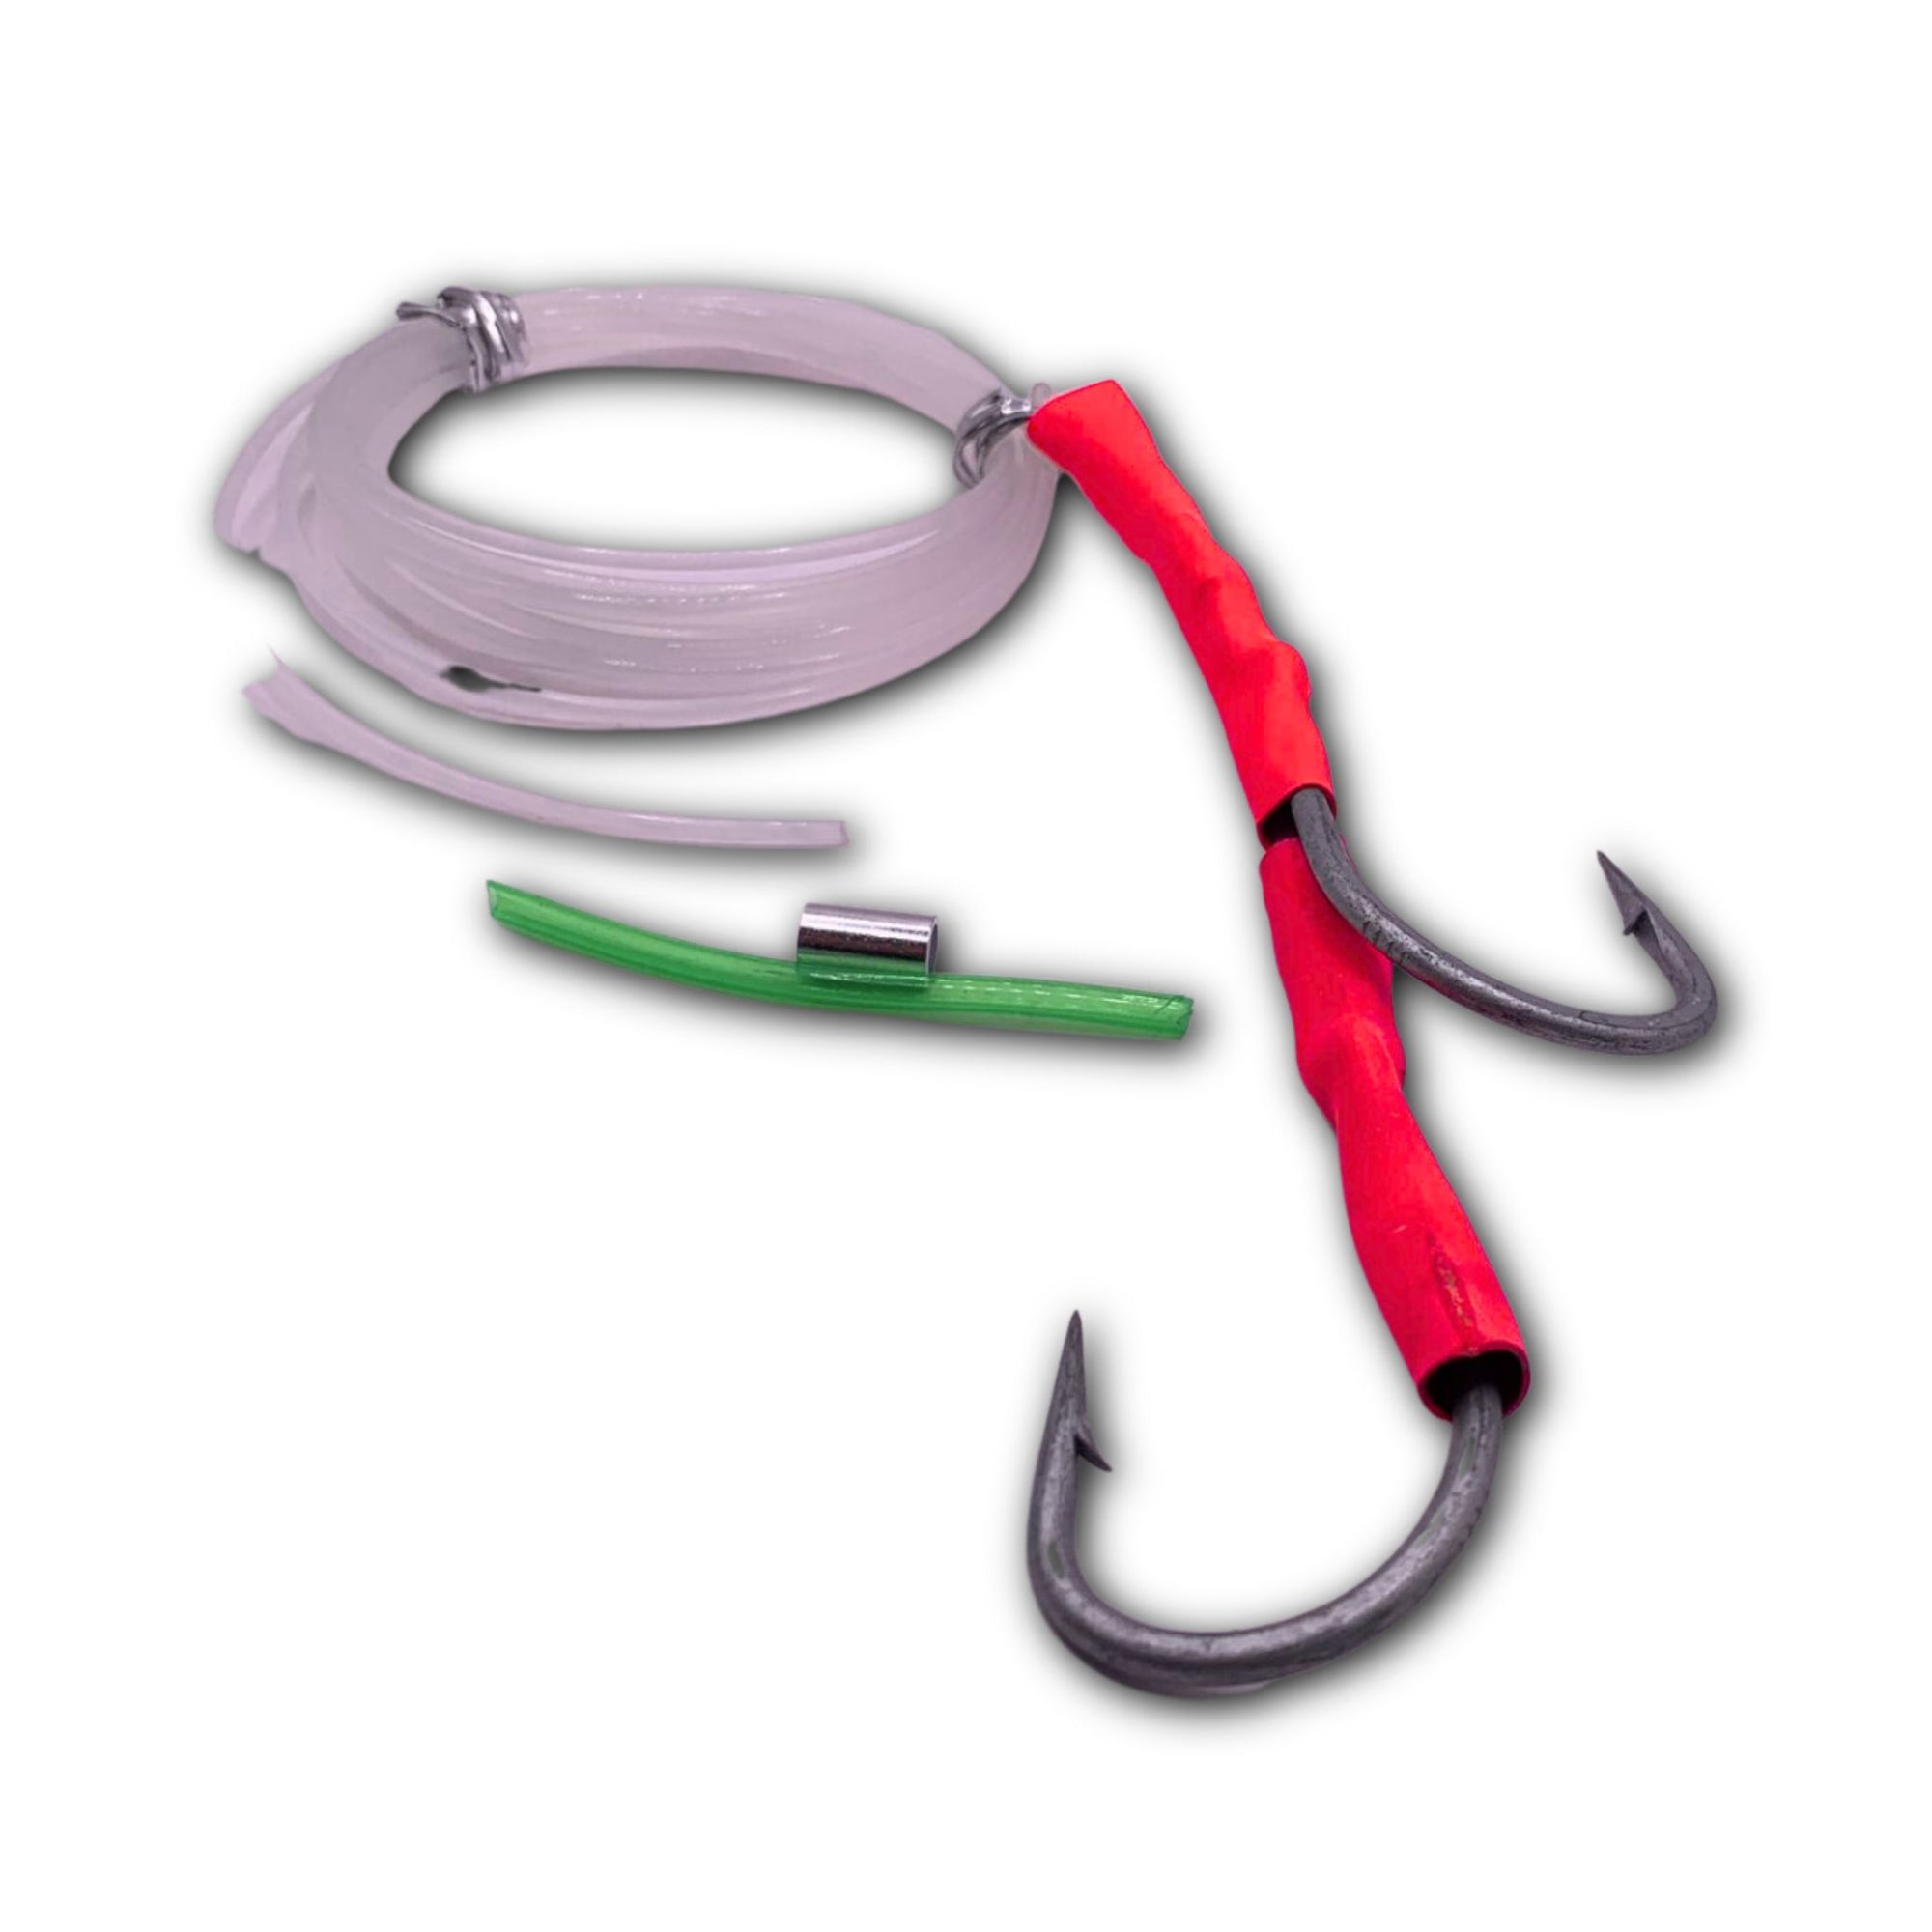 Fishing Pre rigged Game lure assist hook 8/0 - South East Clearance Centre